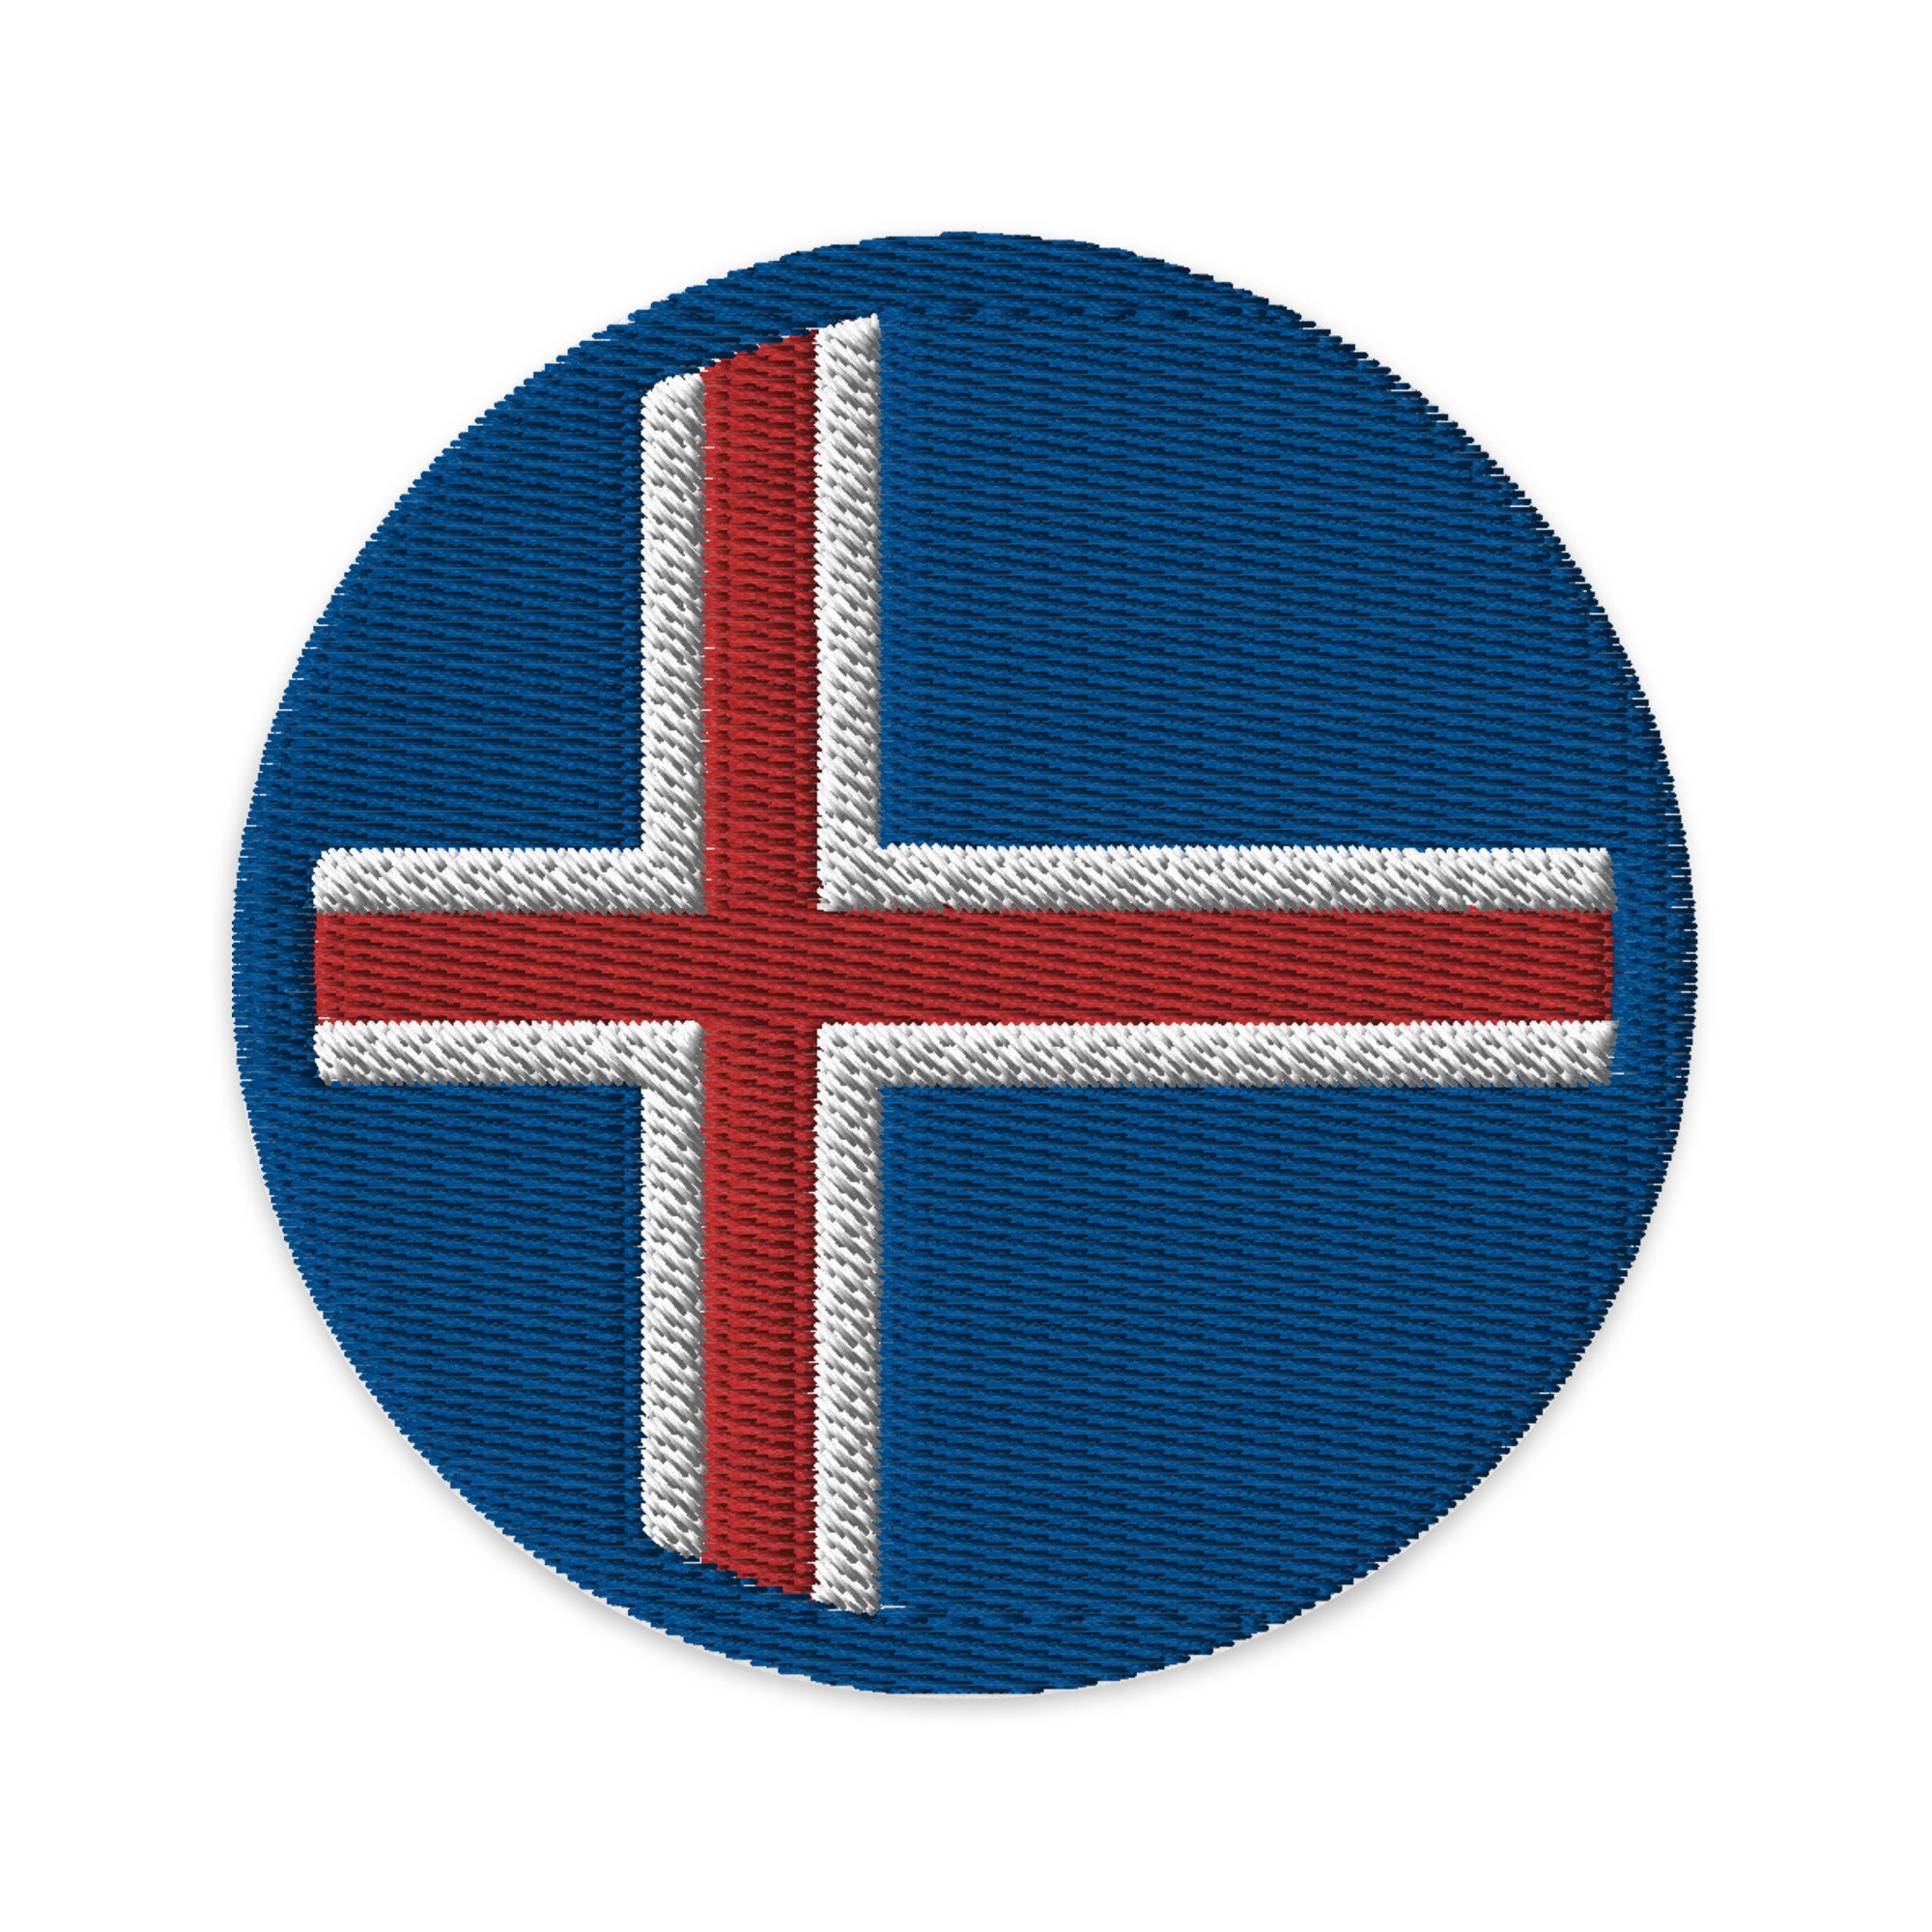 Iceland soccer icons' collector's items